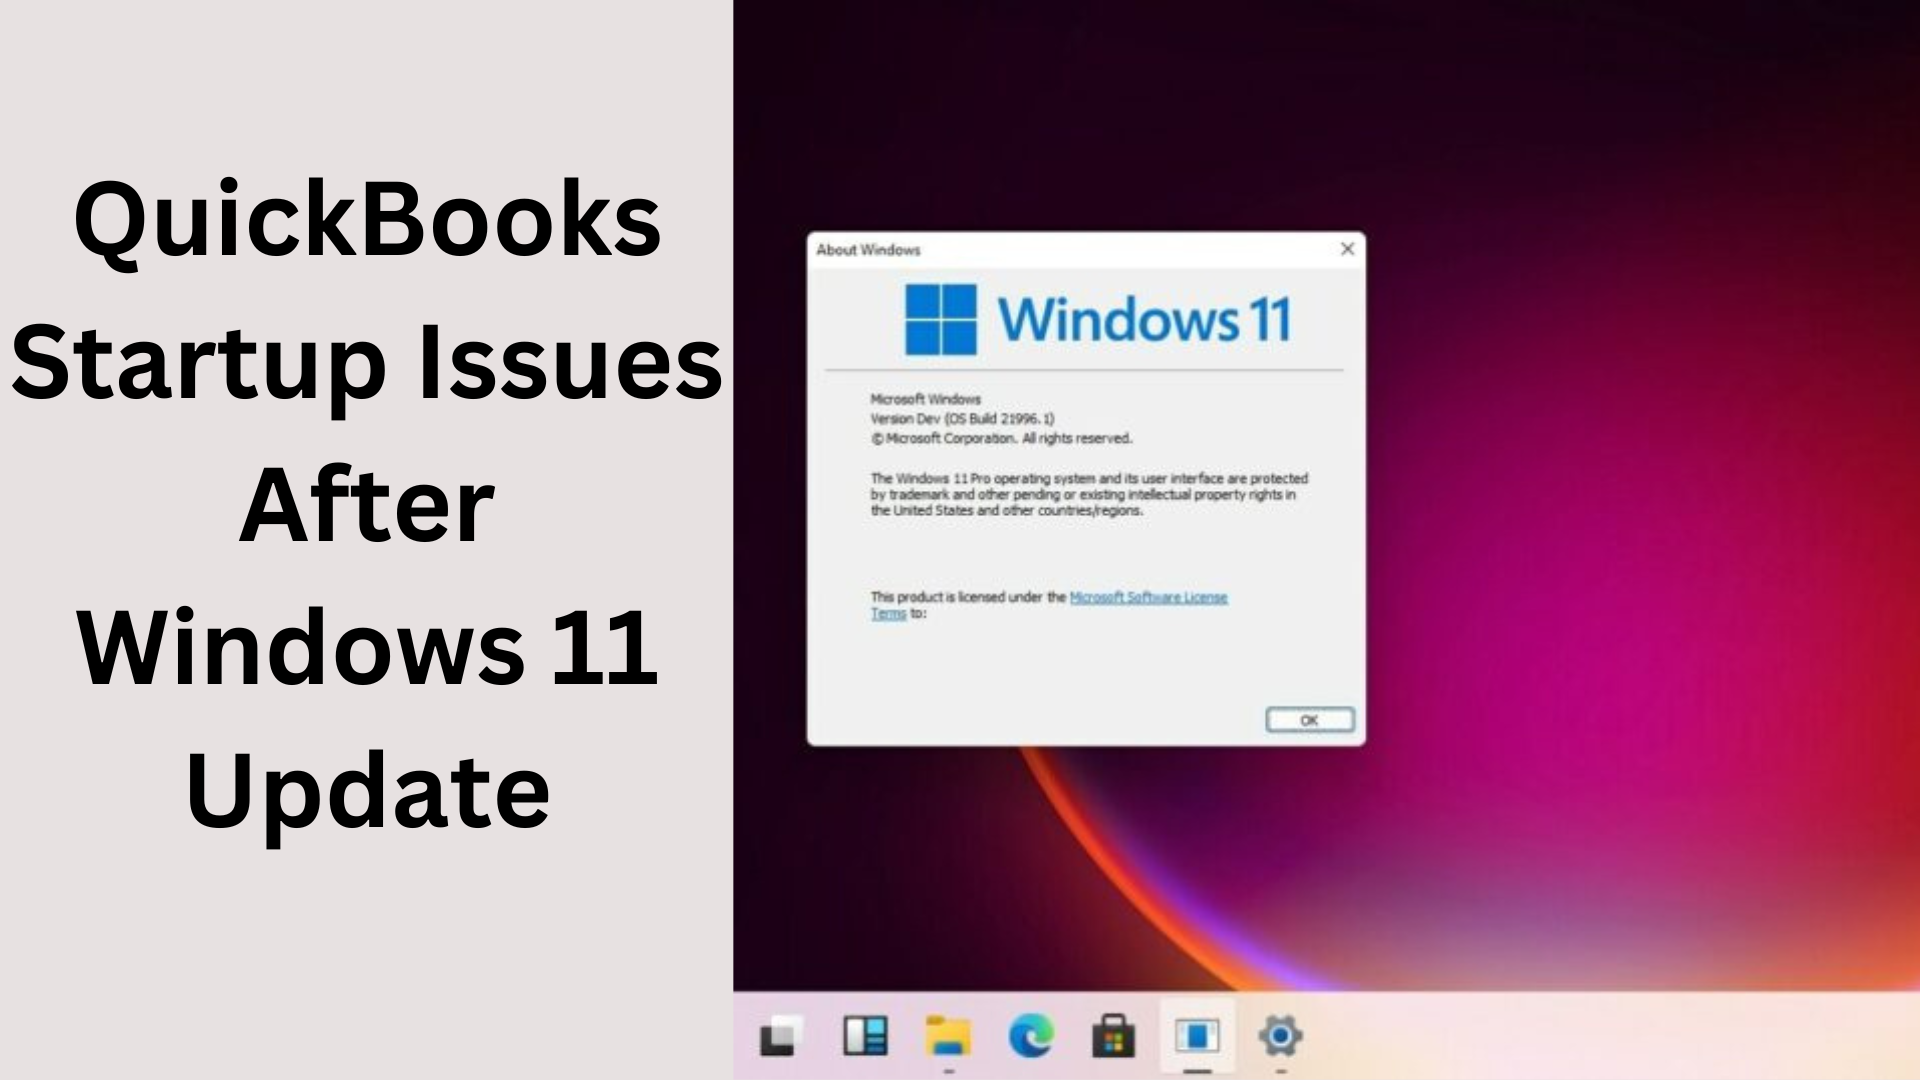 QuickBooks Startup Issues After Windows 11 Update